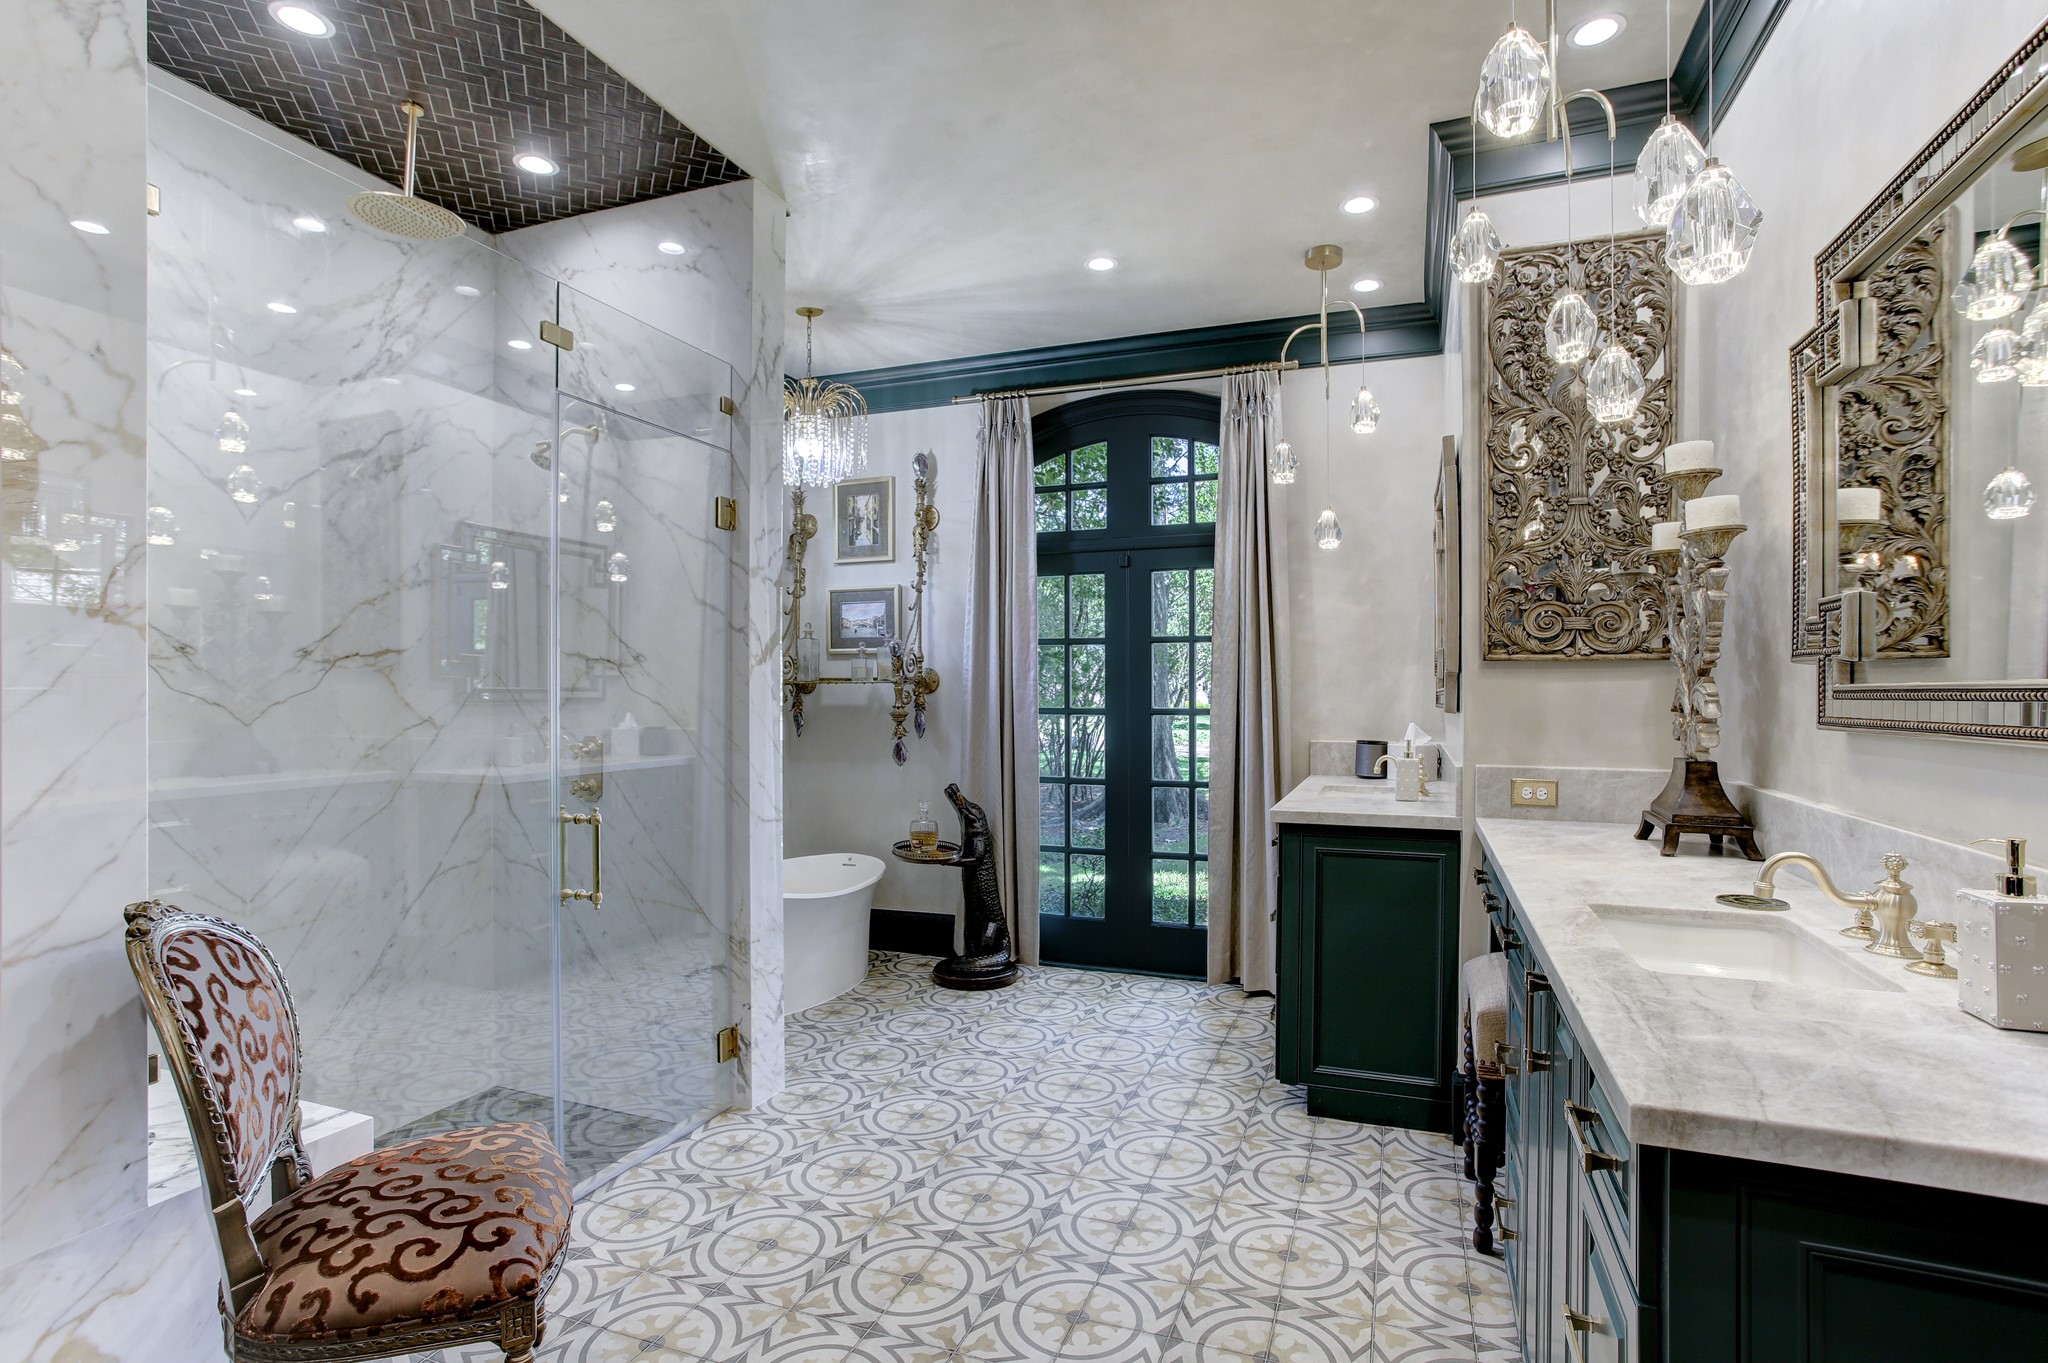 Diamond Brite plaster walls, quartz countertops and a book matched marble solid sheet tile shower are designer touches in this bathroom.